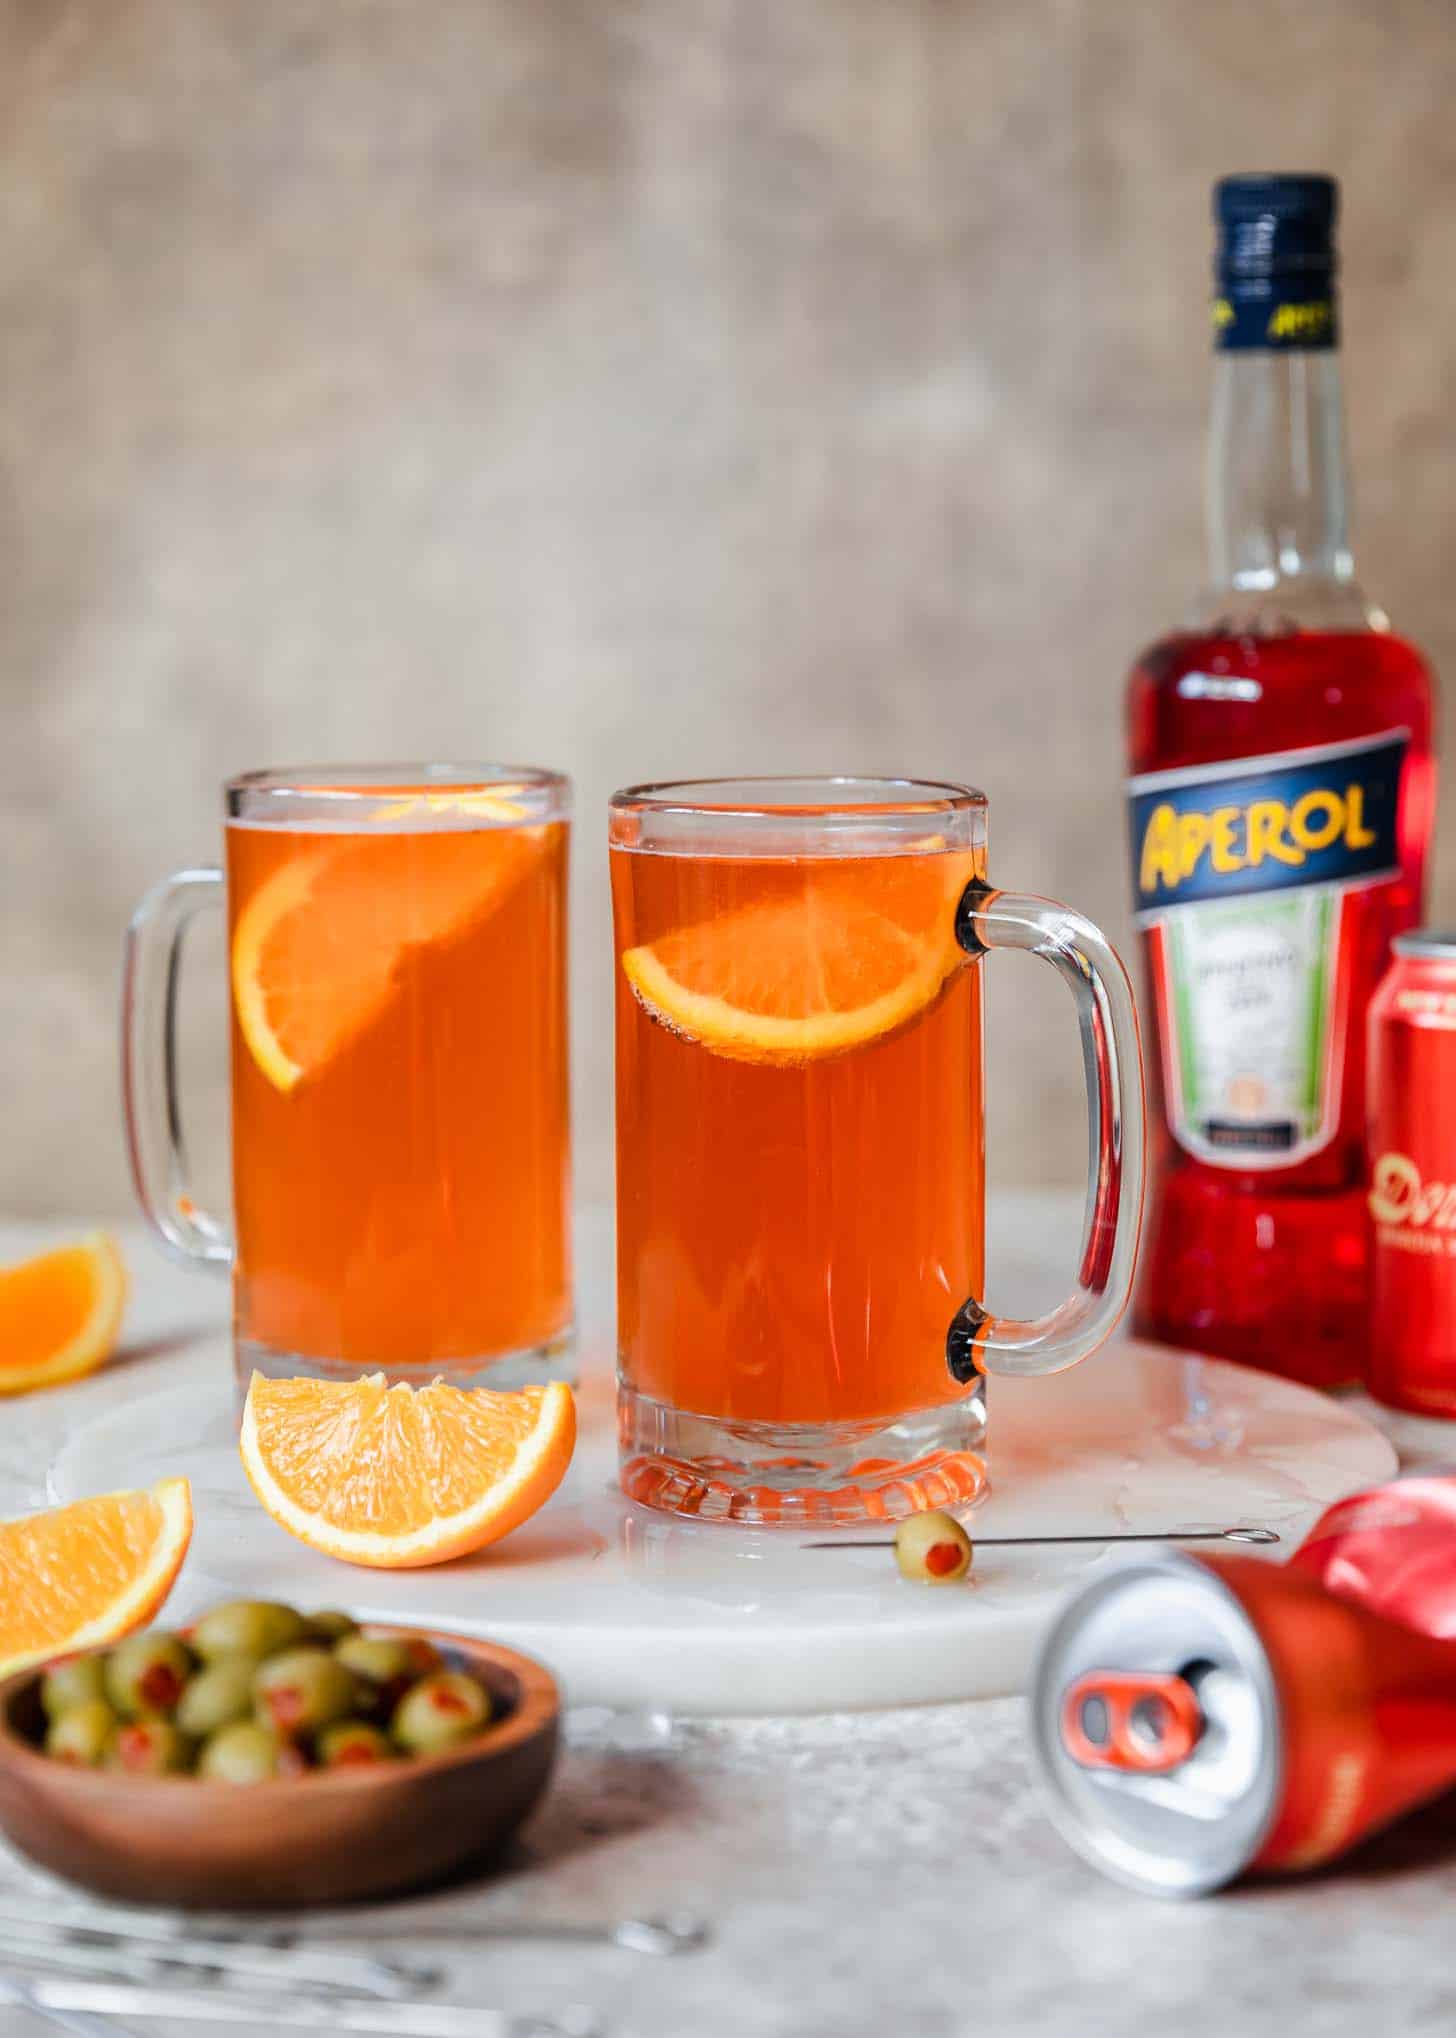 Two sour spaghett cocktails on a marble board next to a beer can, orange slices, bottle of Aperol, and wood bowl of olives with a tan background.